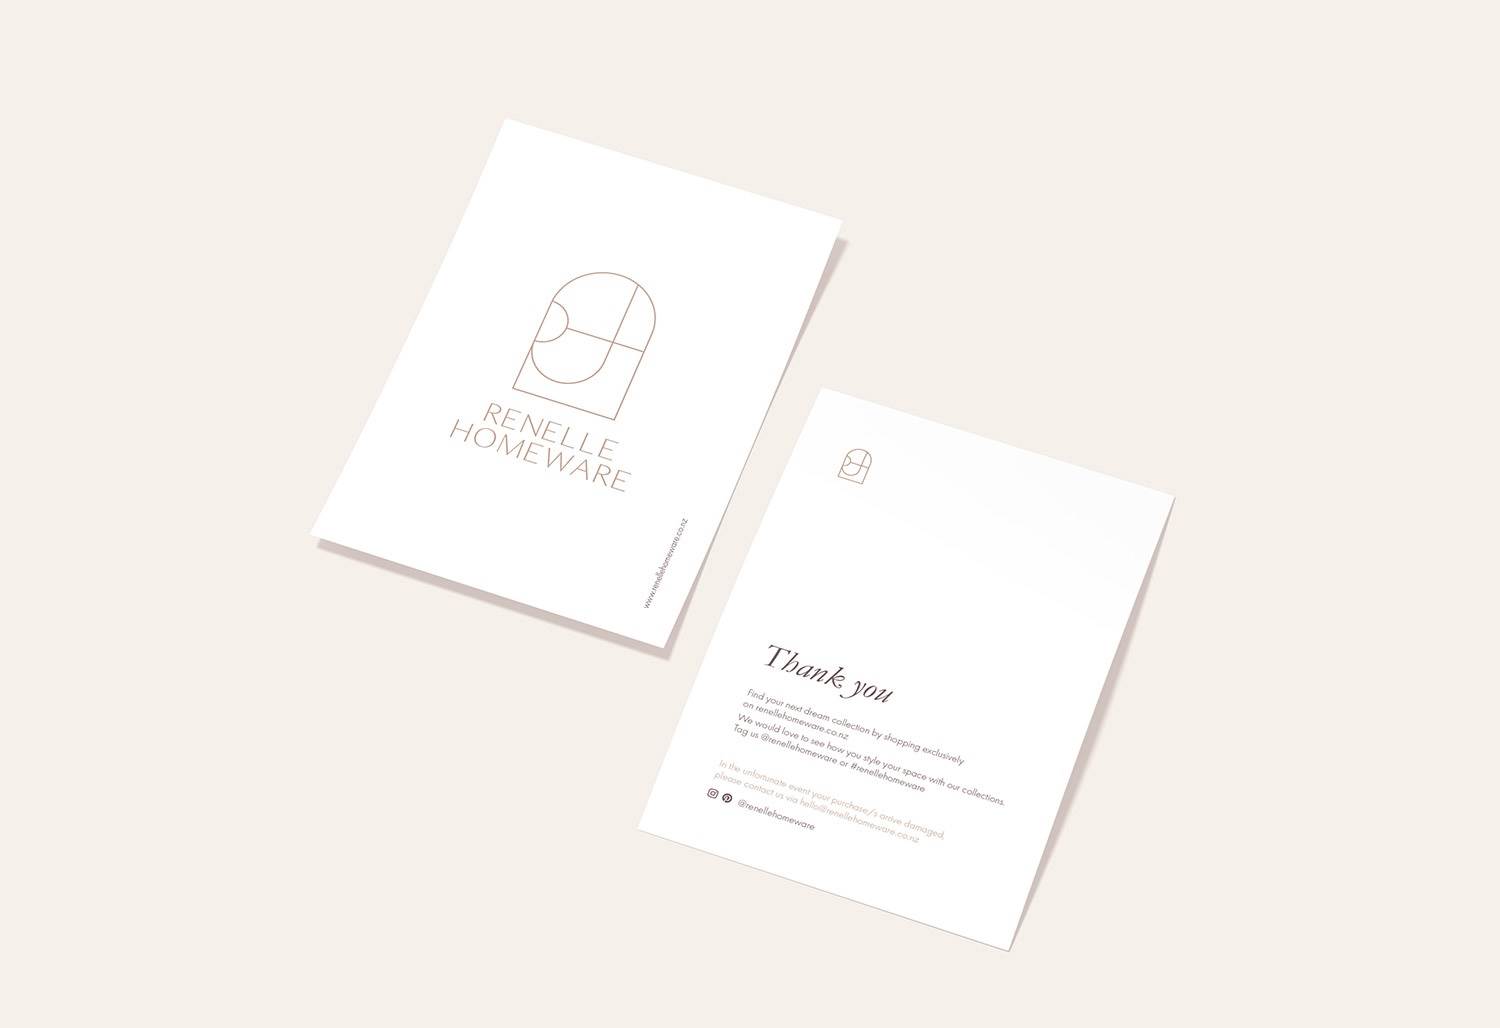 Than You card design - Renelle Homeware